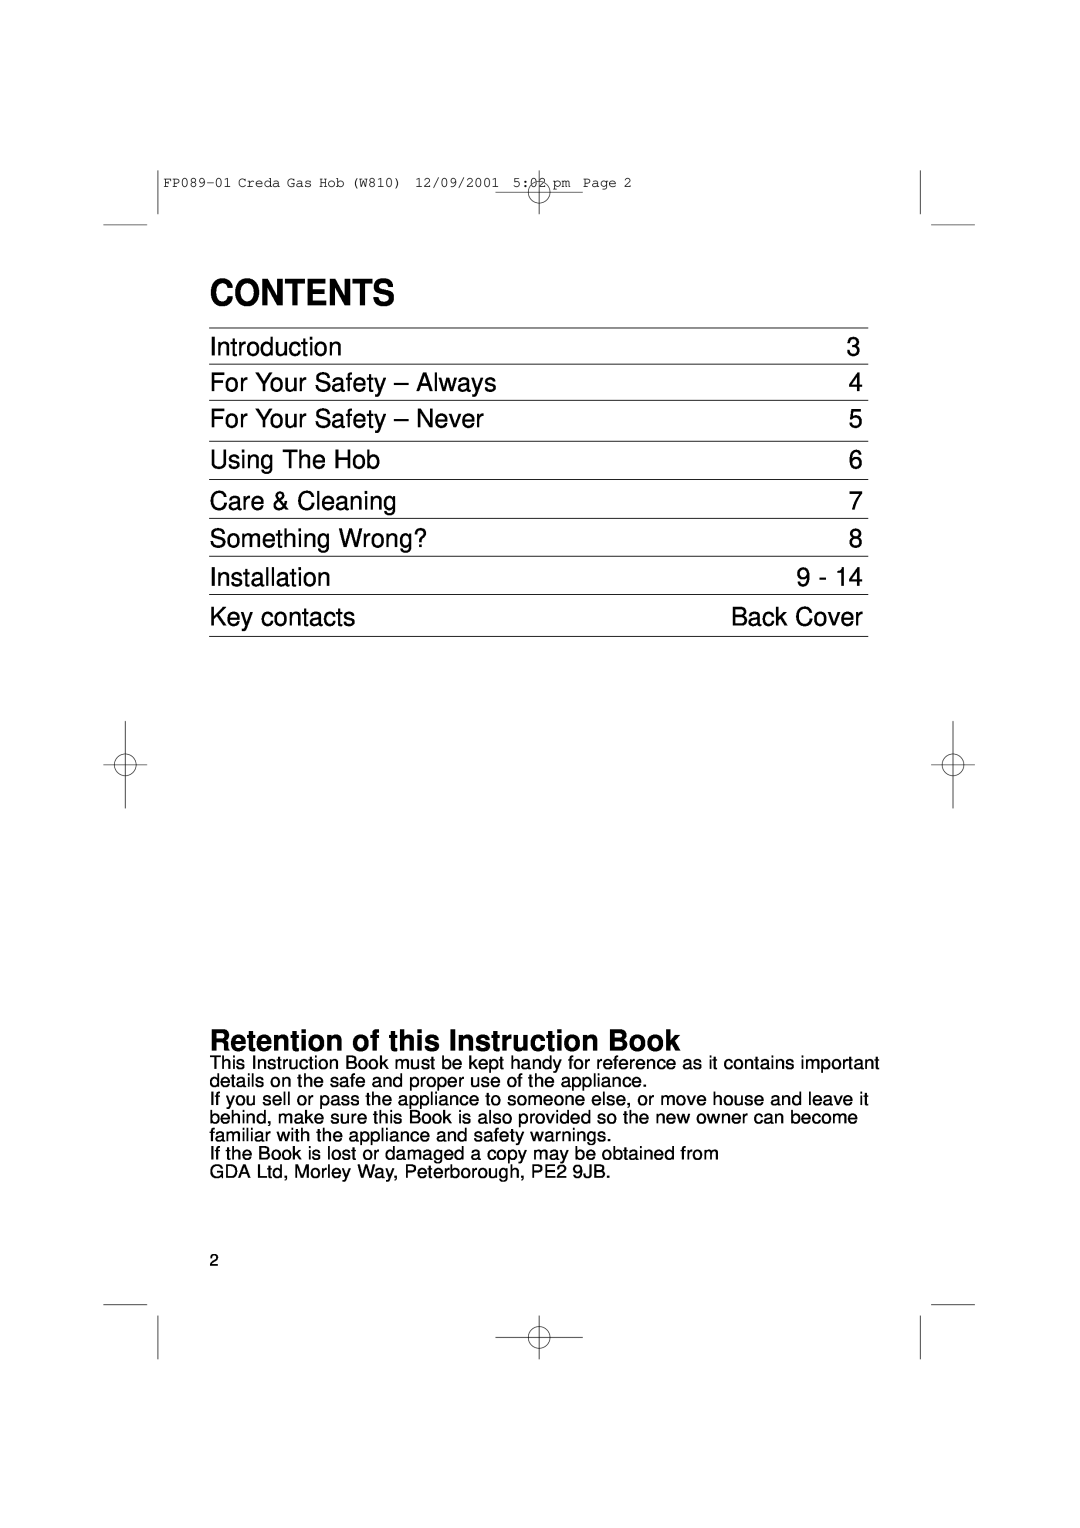 Creda W810 Contents, Retention of this Instruction Book, Introduction, For Your Safety - Always, For Your Safety - Never 